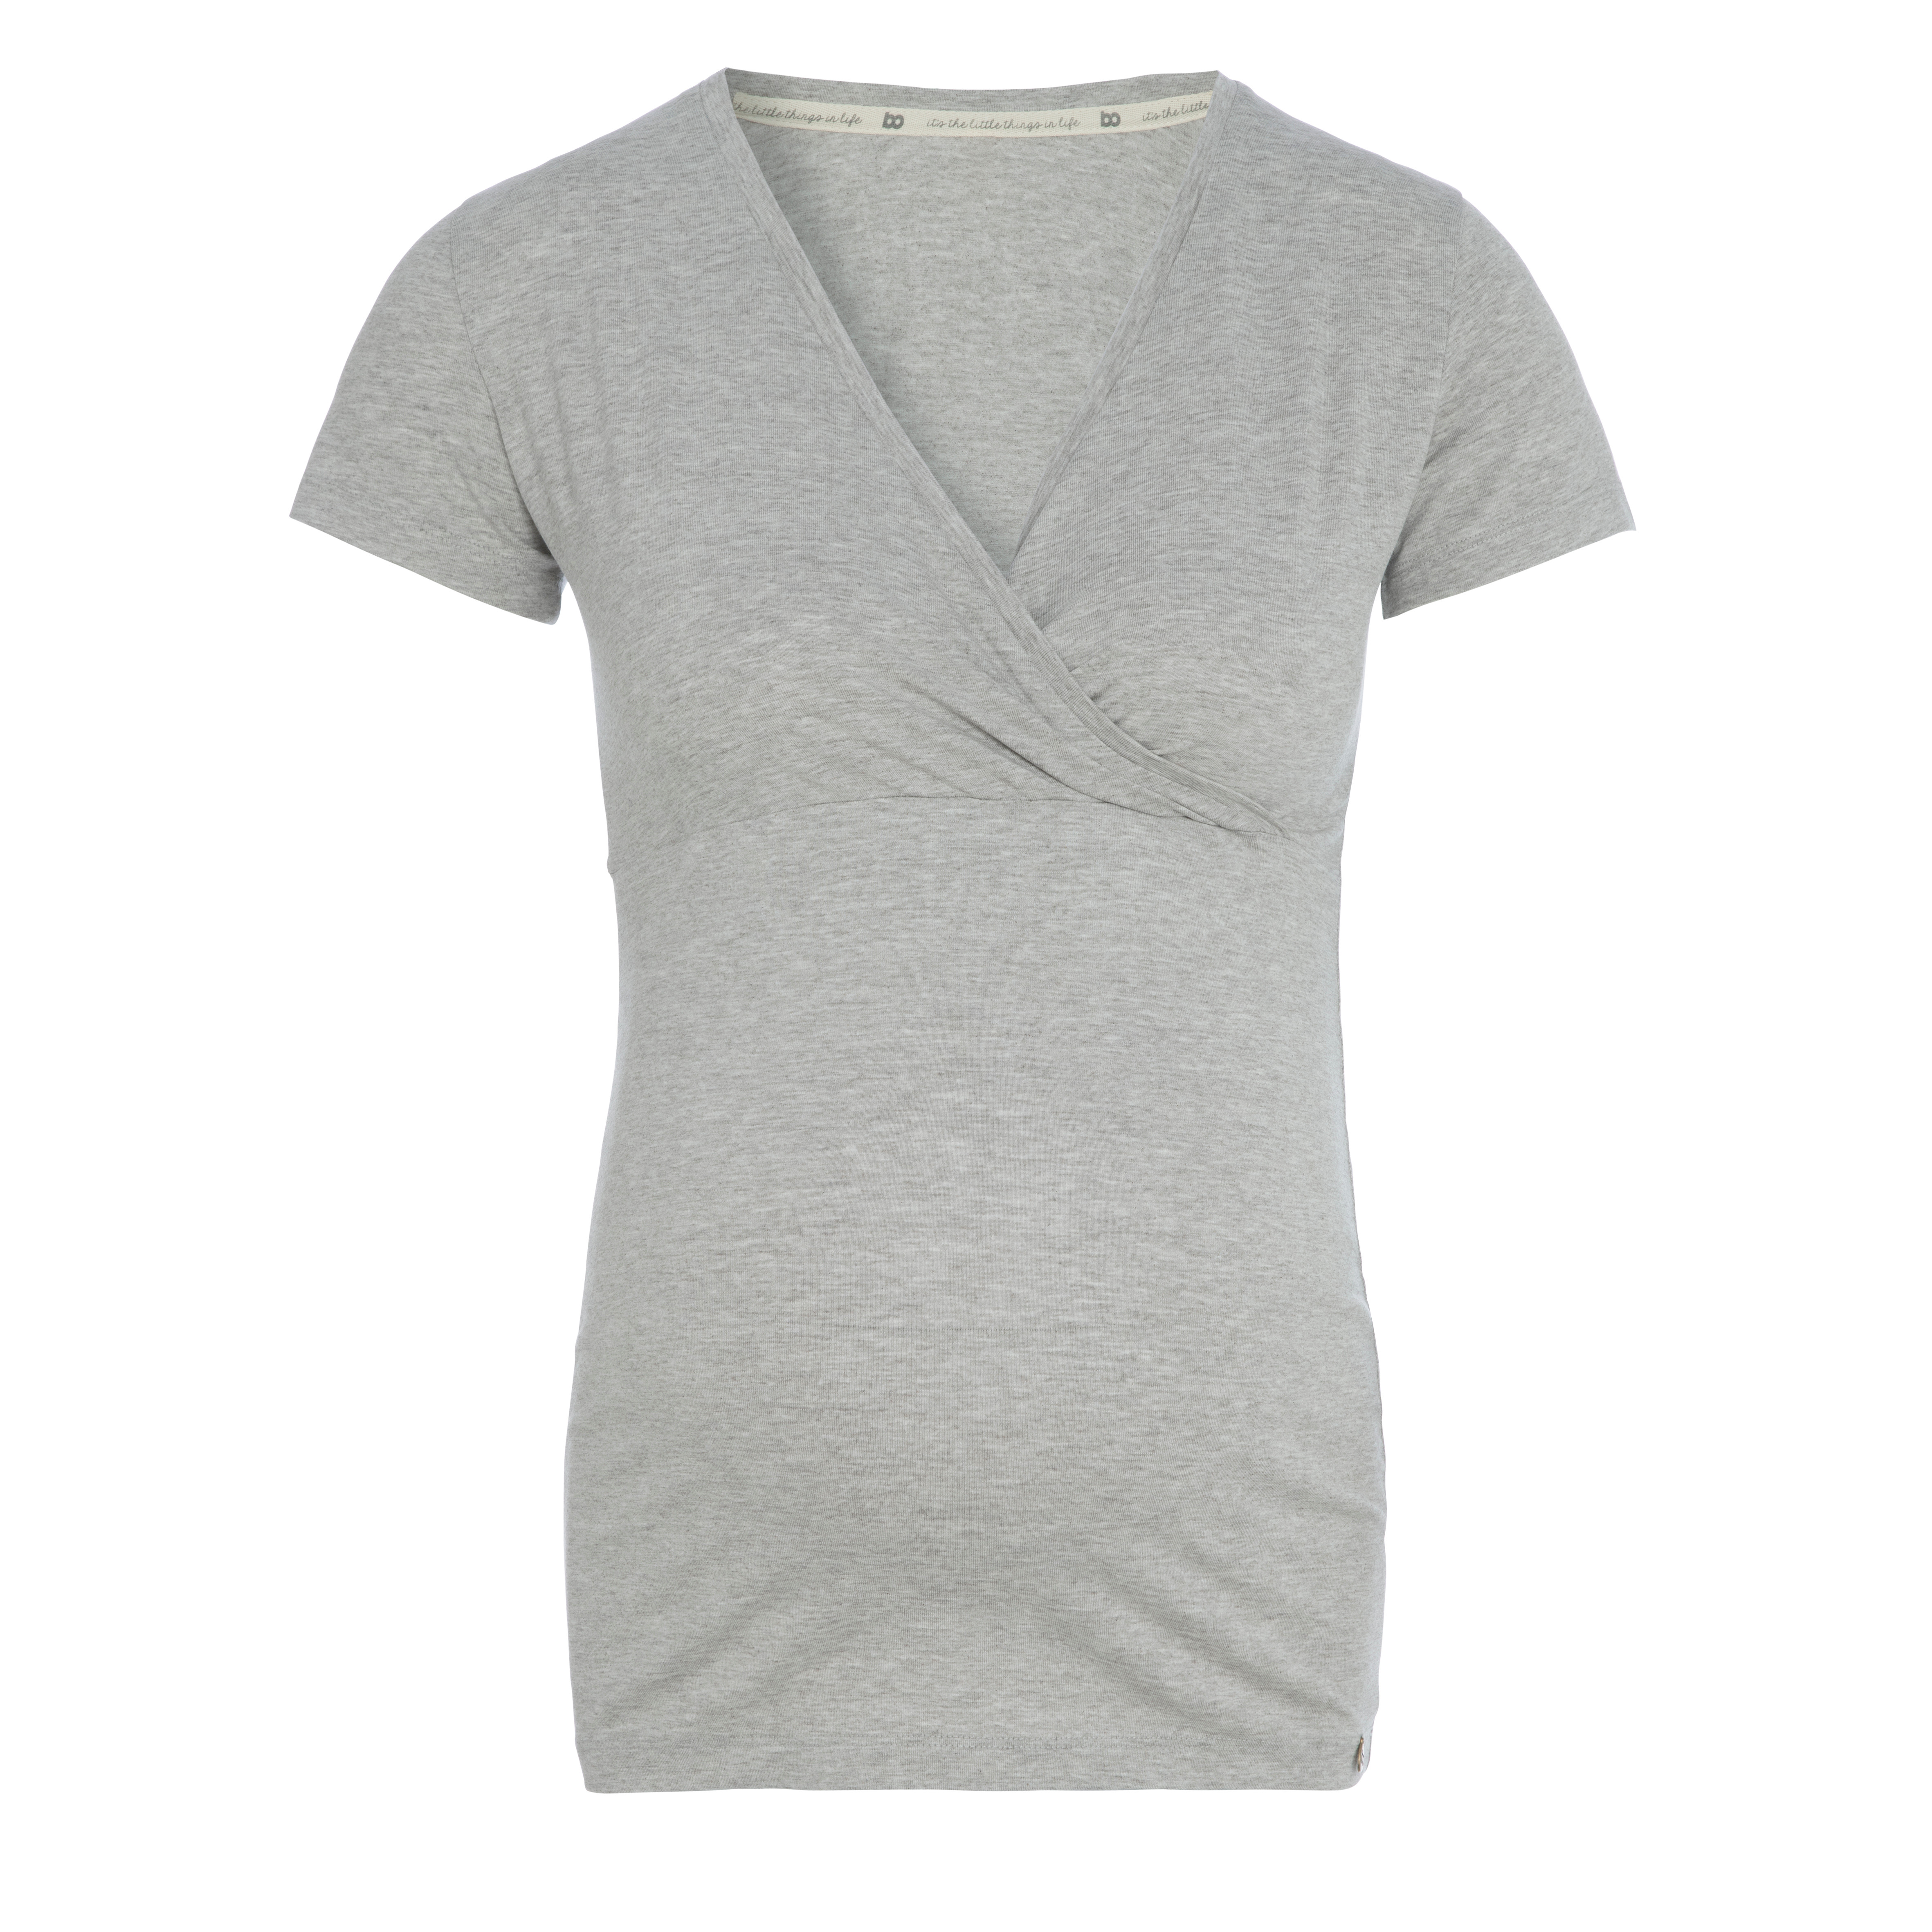 Maternity T-shirt Glow dusty grey - M - With nursing function